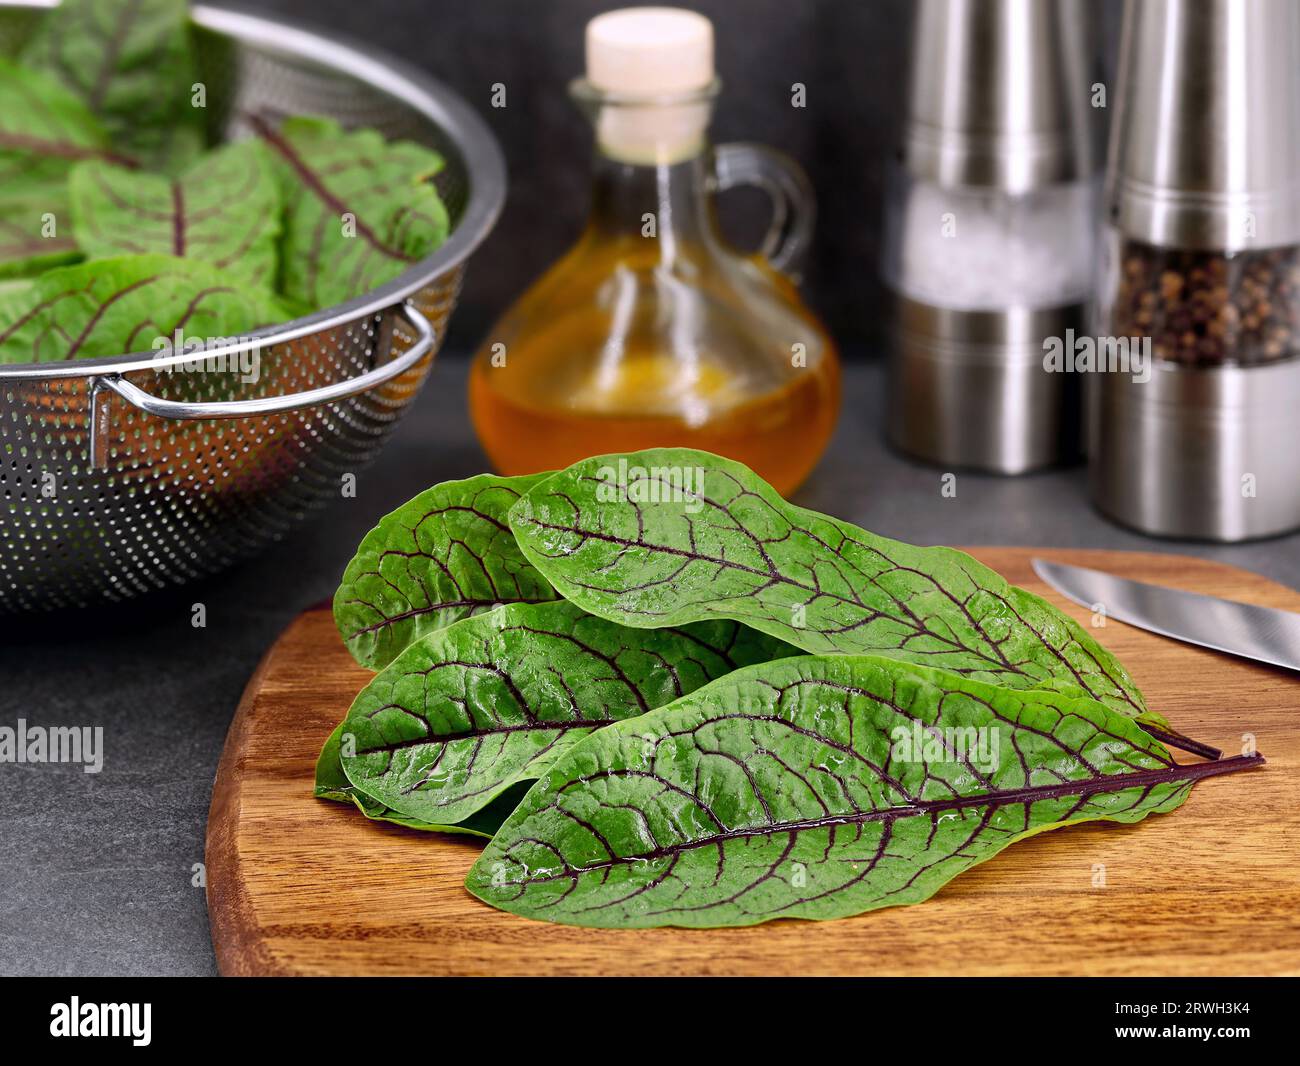 red veined sorrel leaves, Rumex sanguineus on wooden cutting board, preparing a healthy sour fitness salad from freshly harvested bloody dock leaves Stock Photo